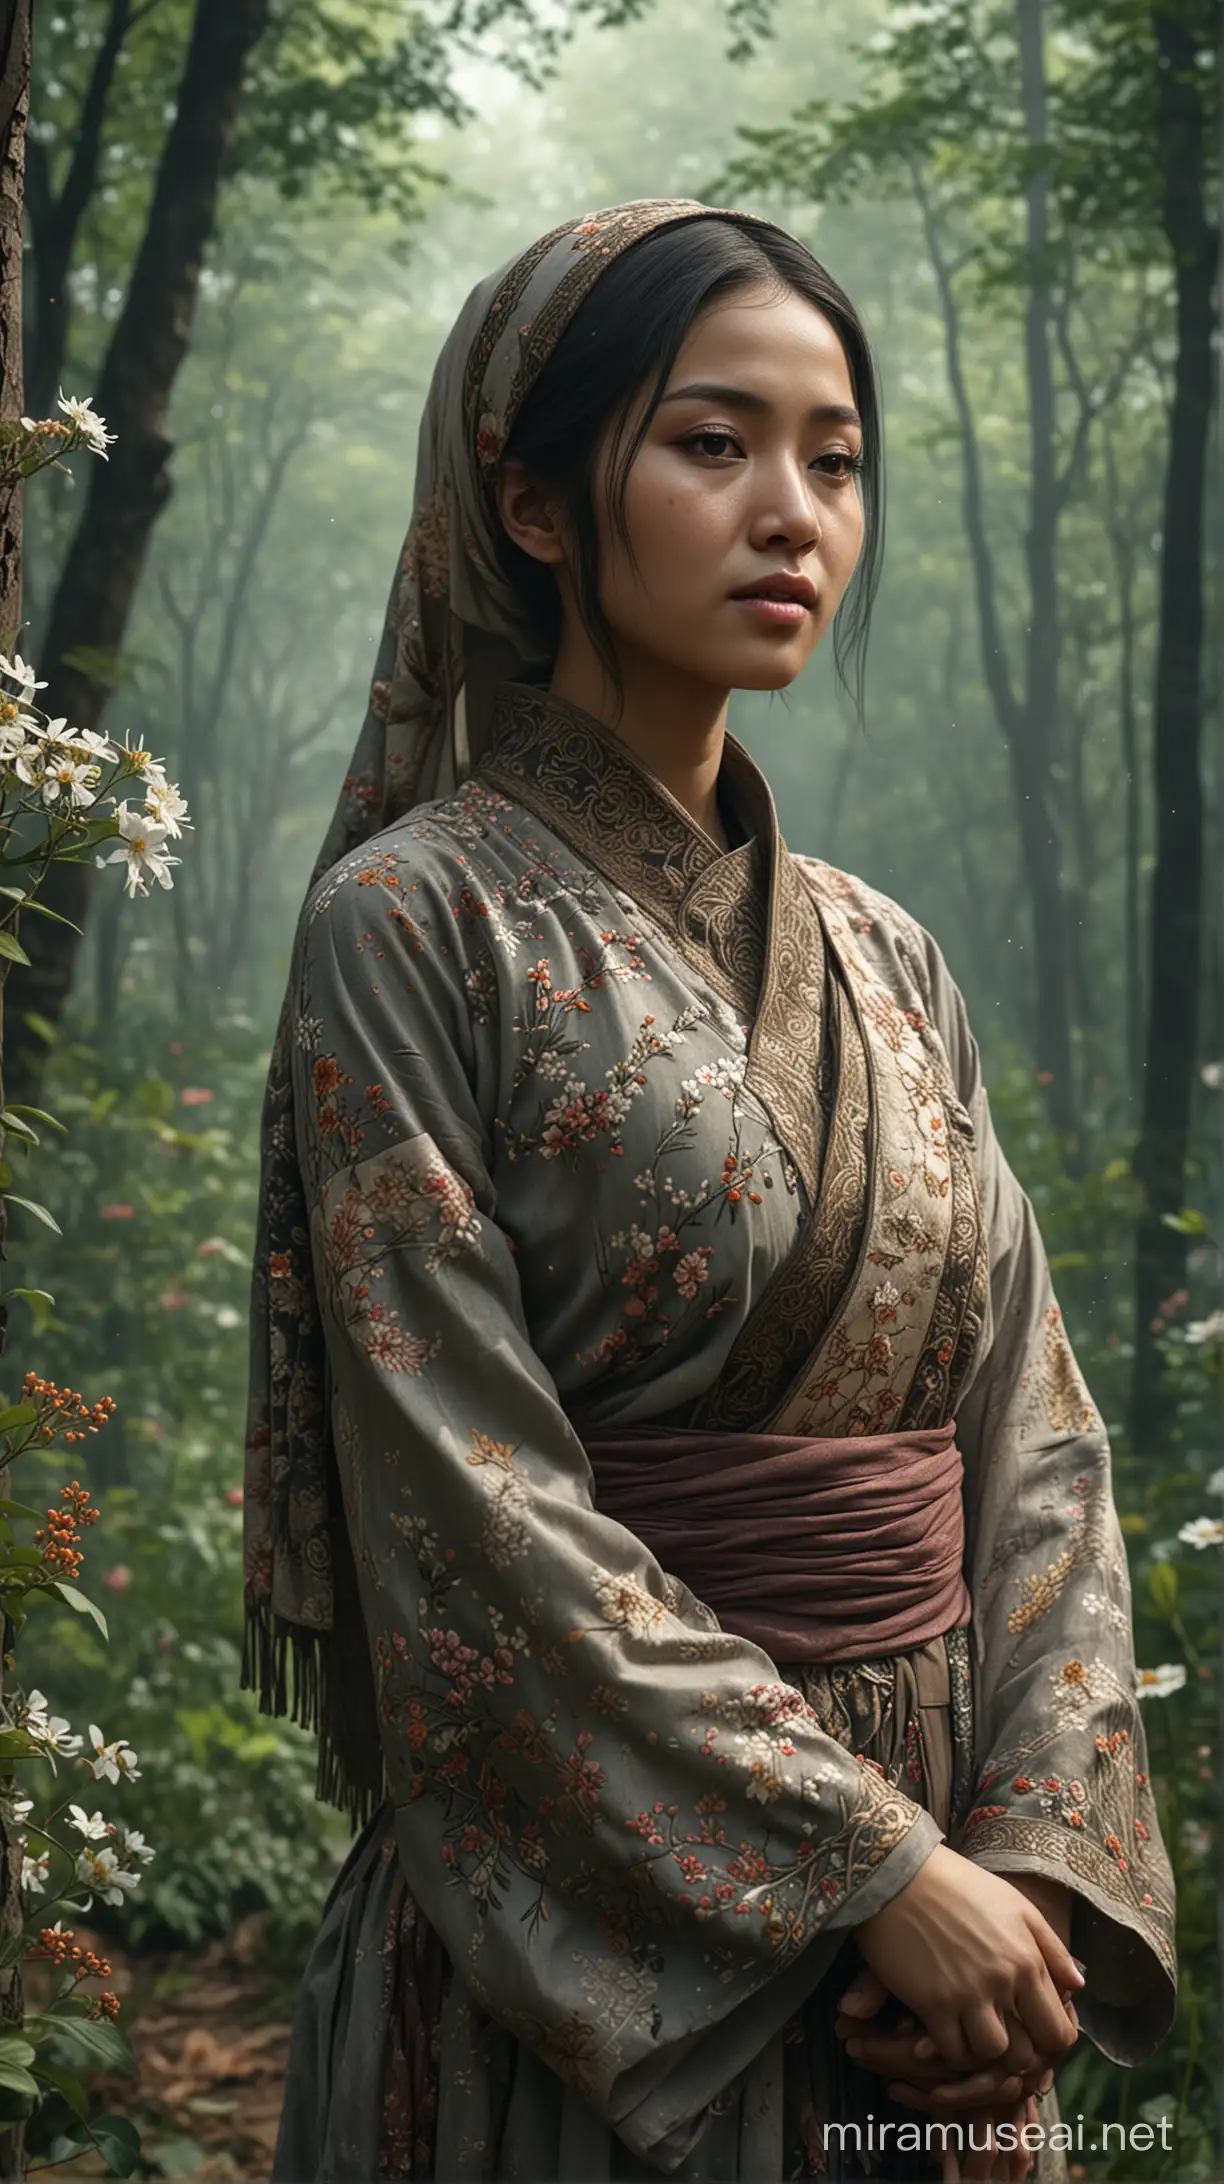 Full body shot of a beautiful Indonesian girl, state of decay and brittle, frail, sneezing, hijab wearing hanfu clothes, lost in wild forest, rustic old prosthetics, covered in lush, mold, nice face, wild flowers and nature, hyper realistic, highly detailed, intricate, professional.PhotoReal v2 vibrant 